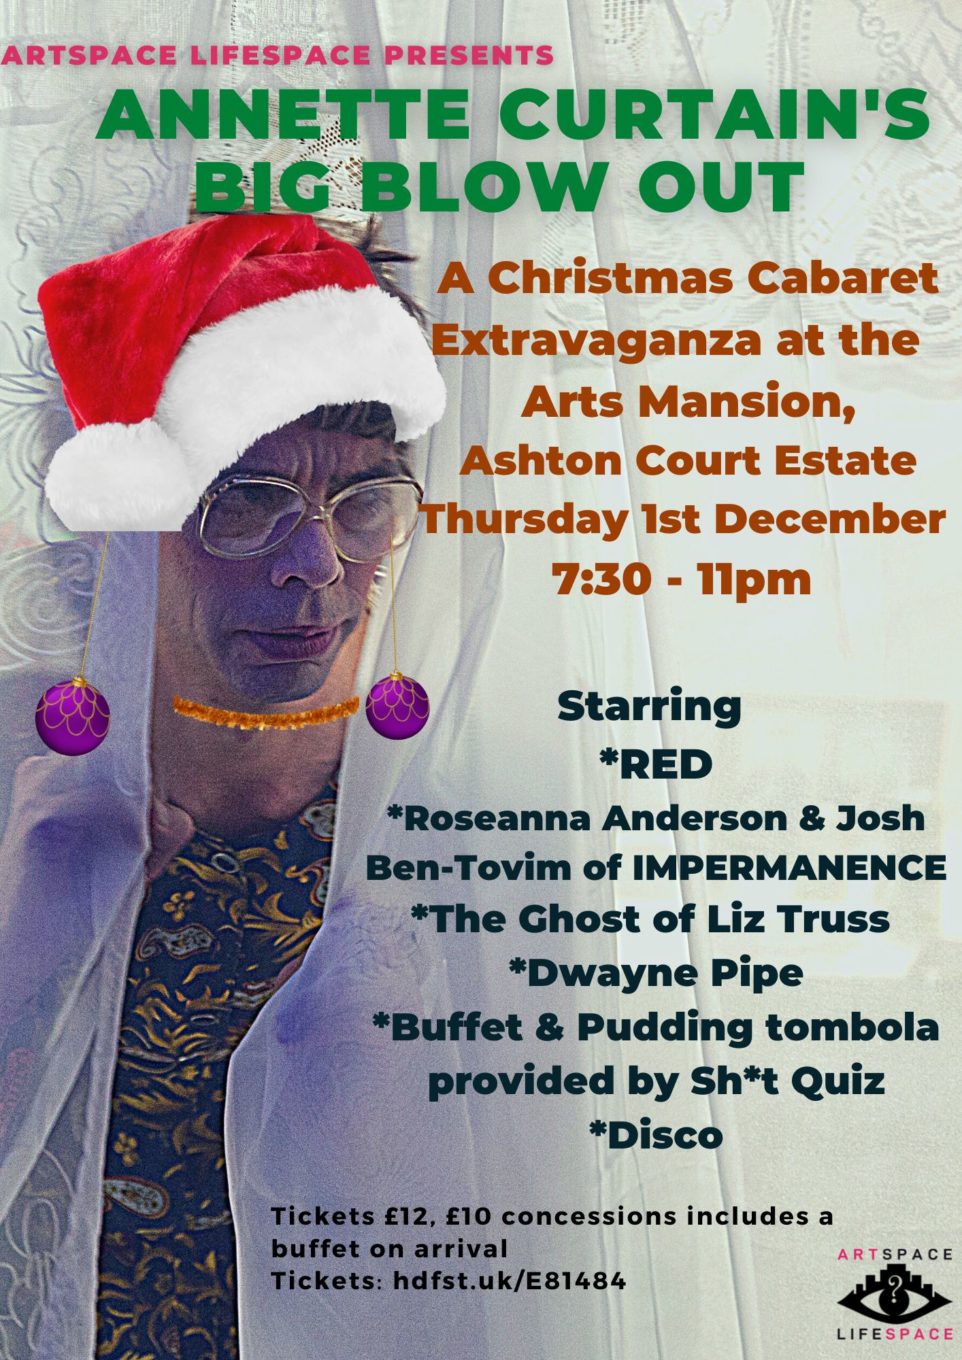 Poster design featuring Annette Curtain in her festive finery peeking out from behind a curtain.